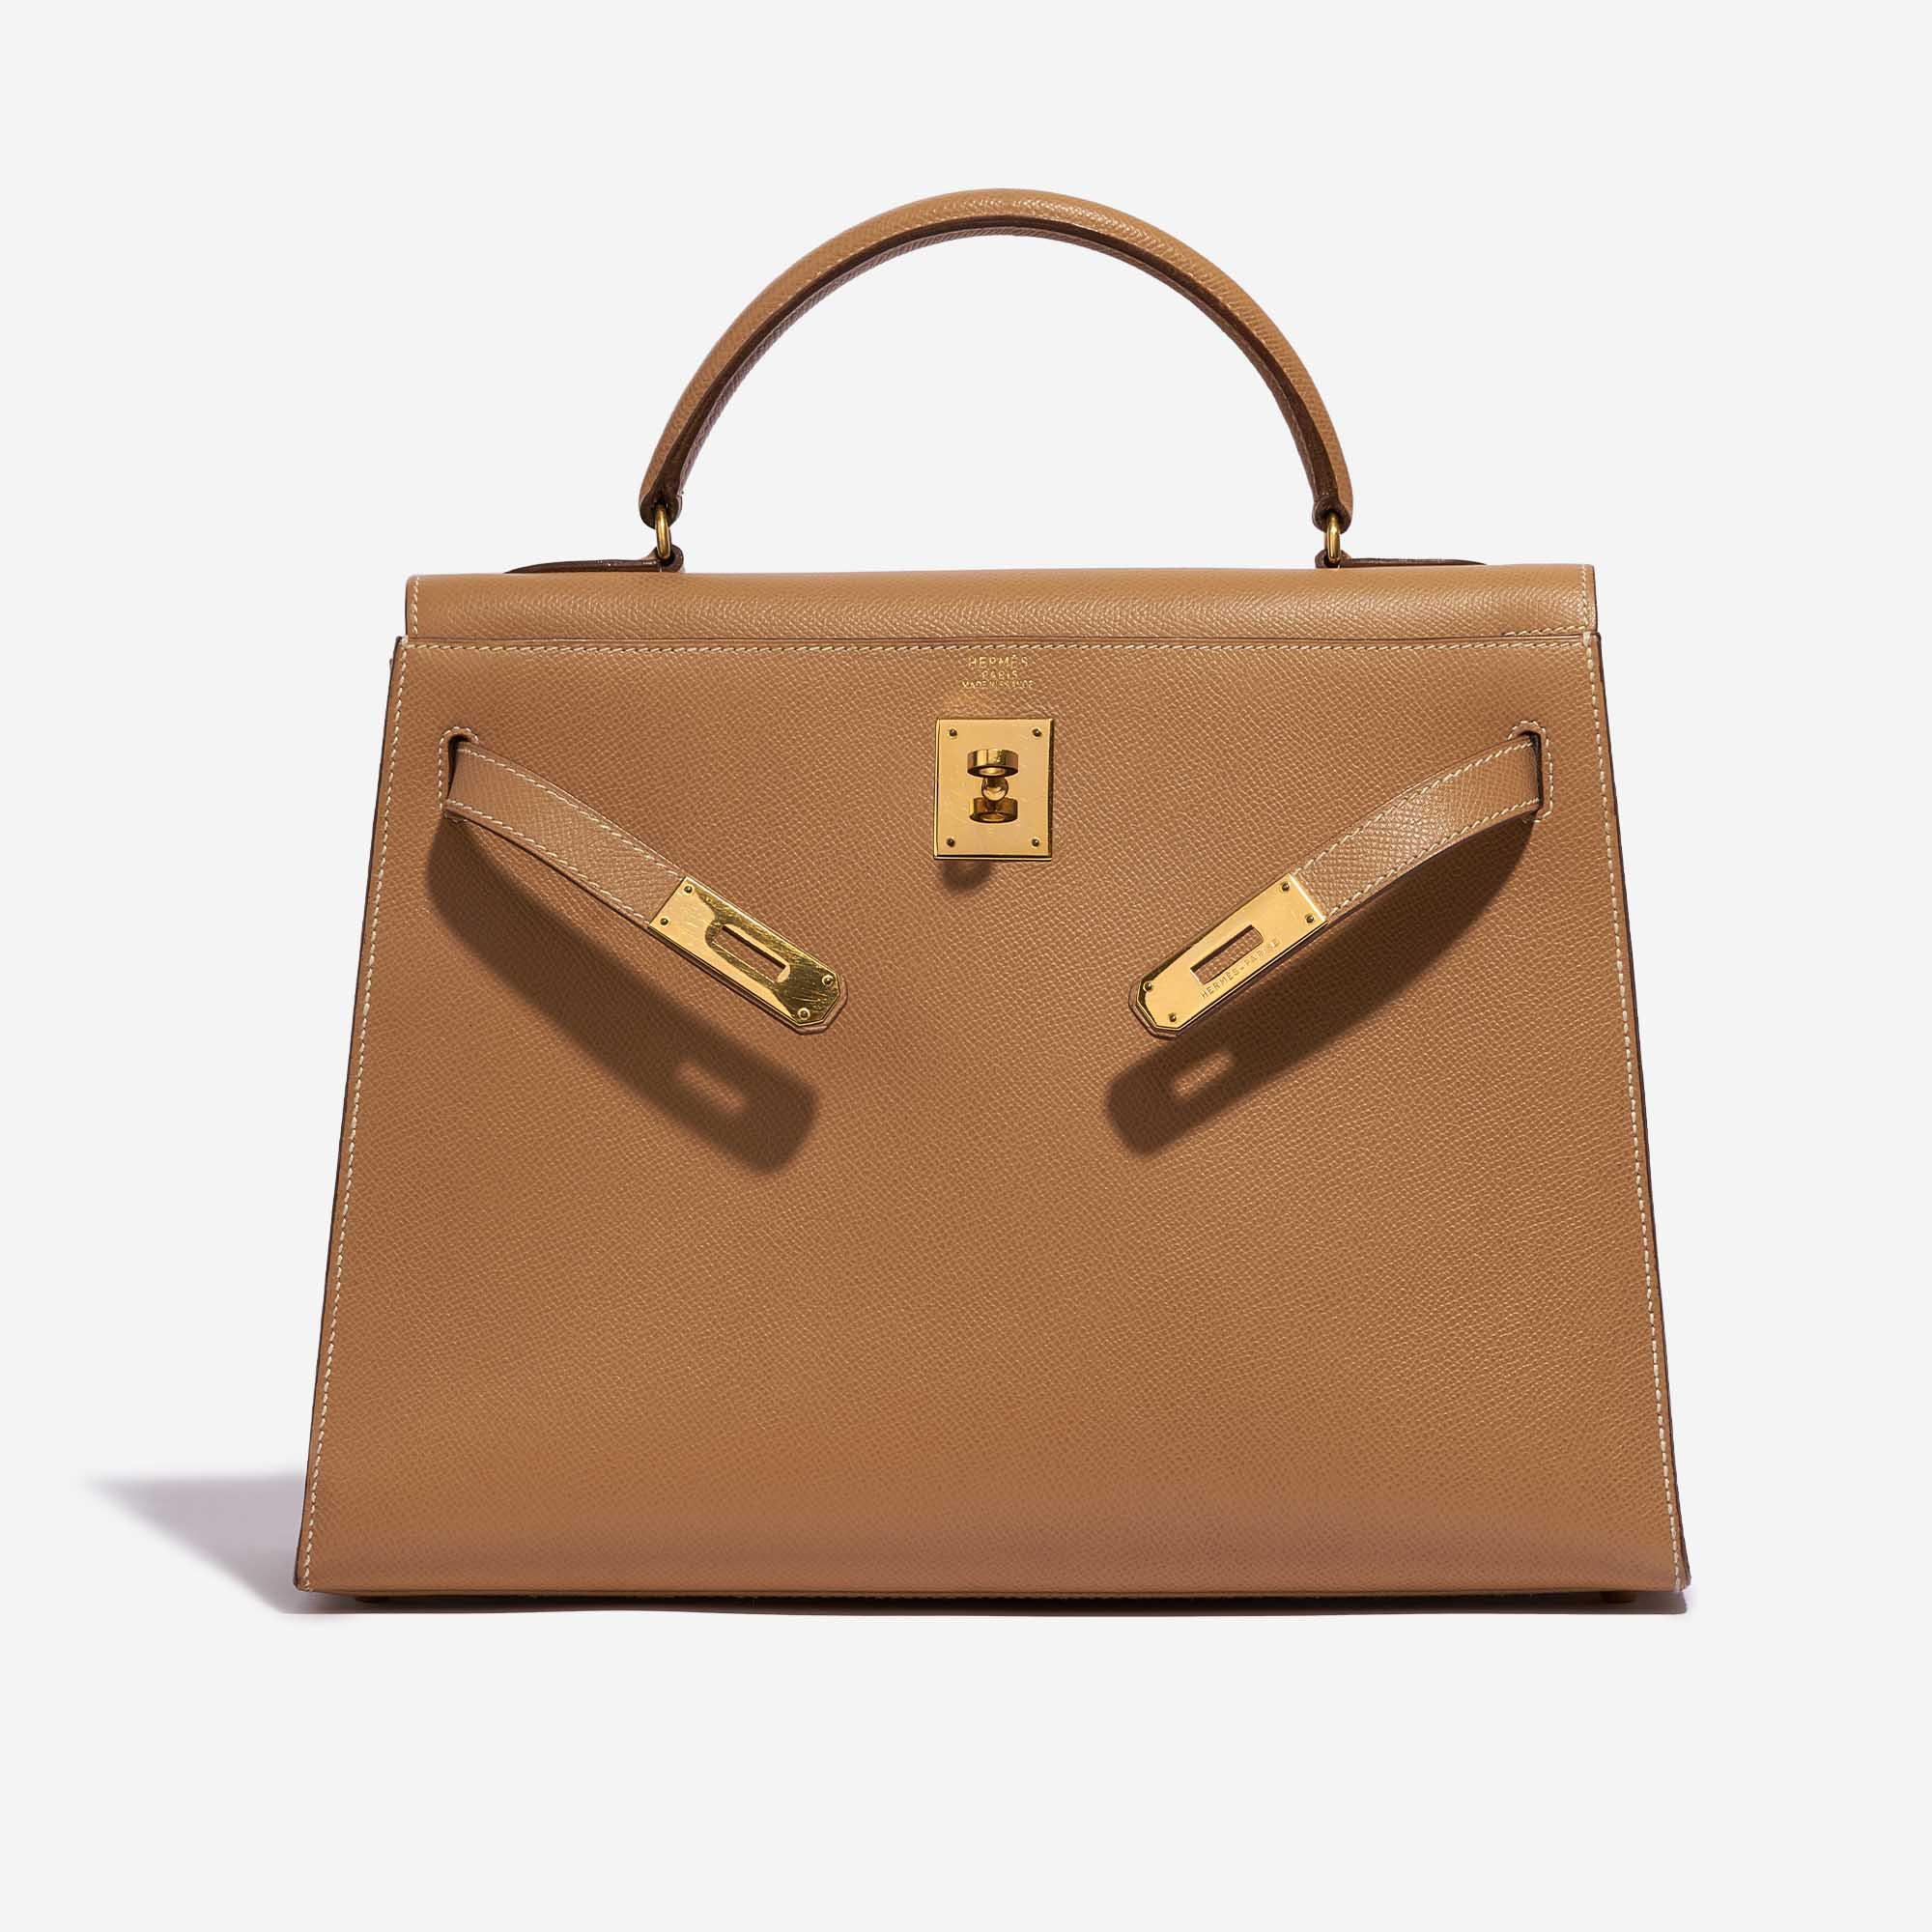 Close up & Review of Hermes Kelly 32 Gold Epsom Sellier 